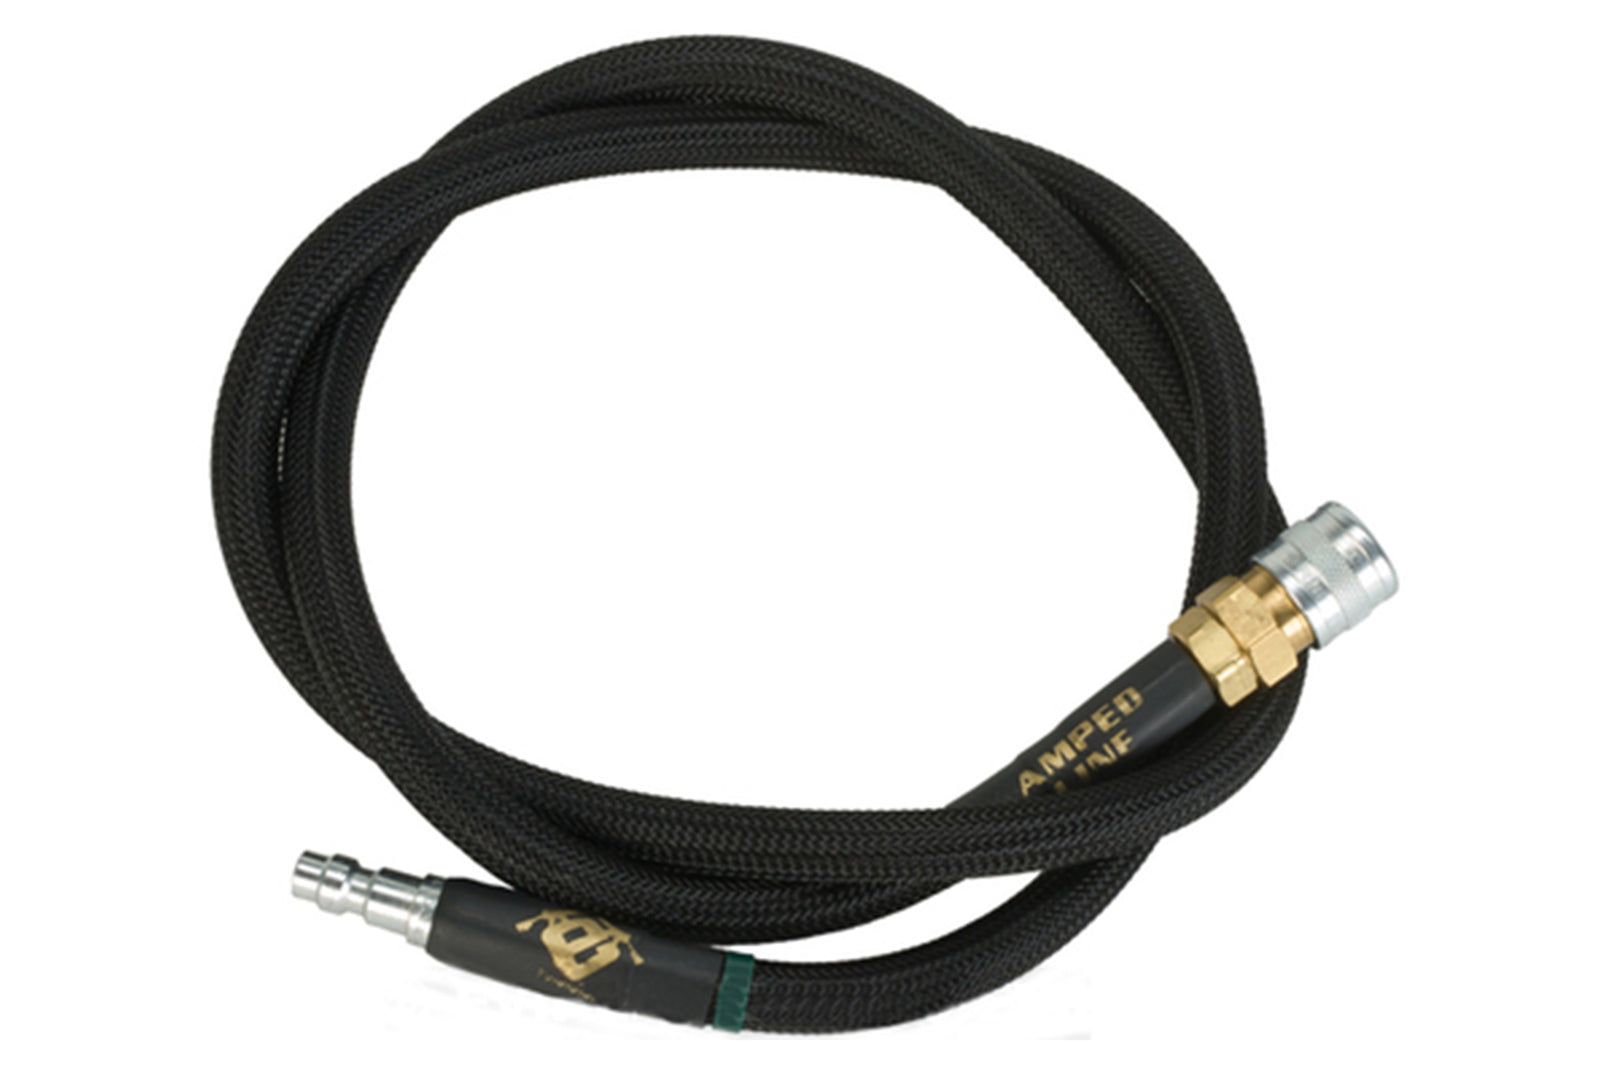 Amped Airsoft 36in. Standard Braided Hose for HPA Systems with Quick Detach Fittings